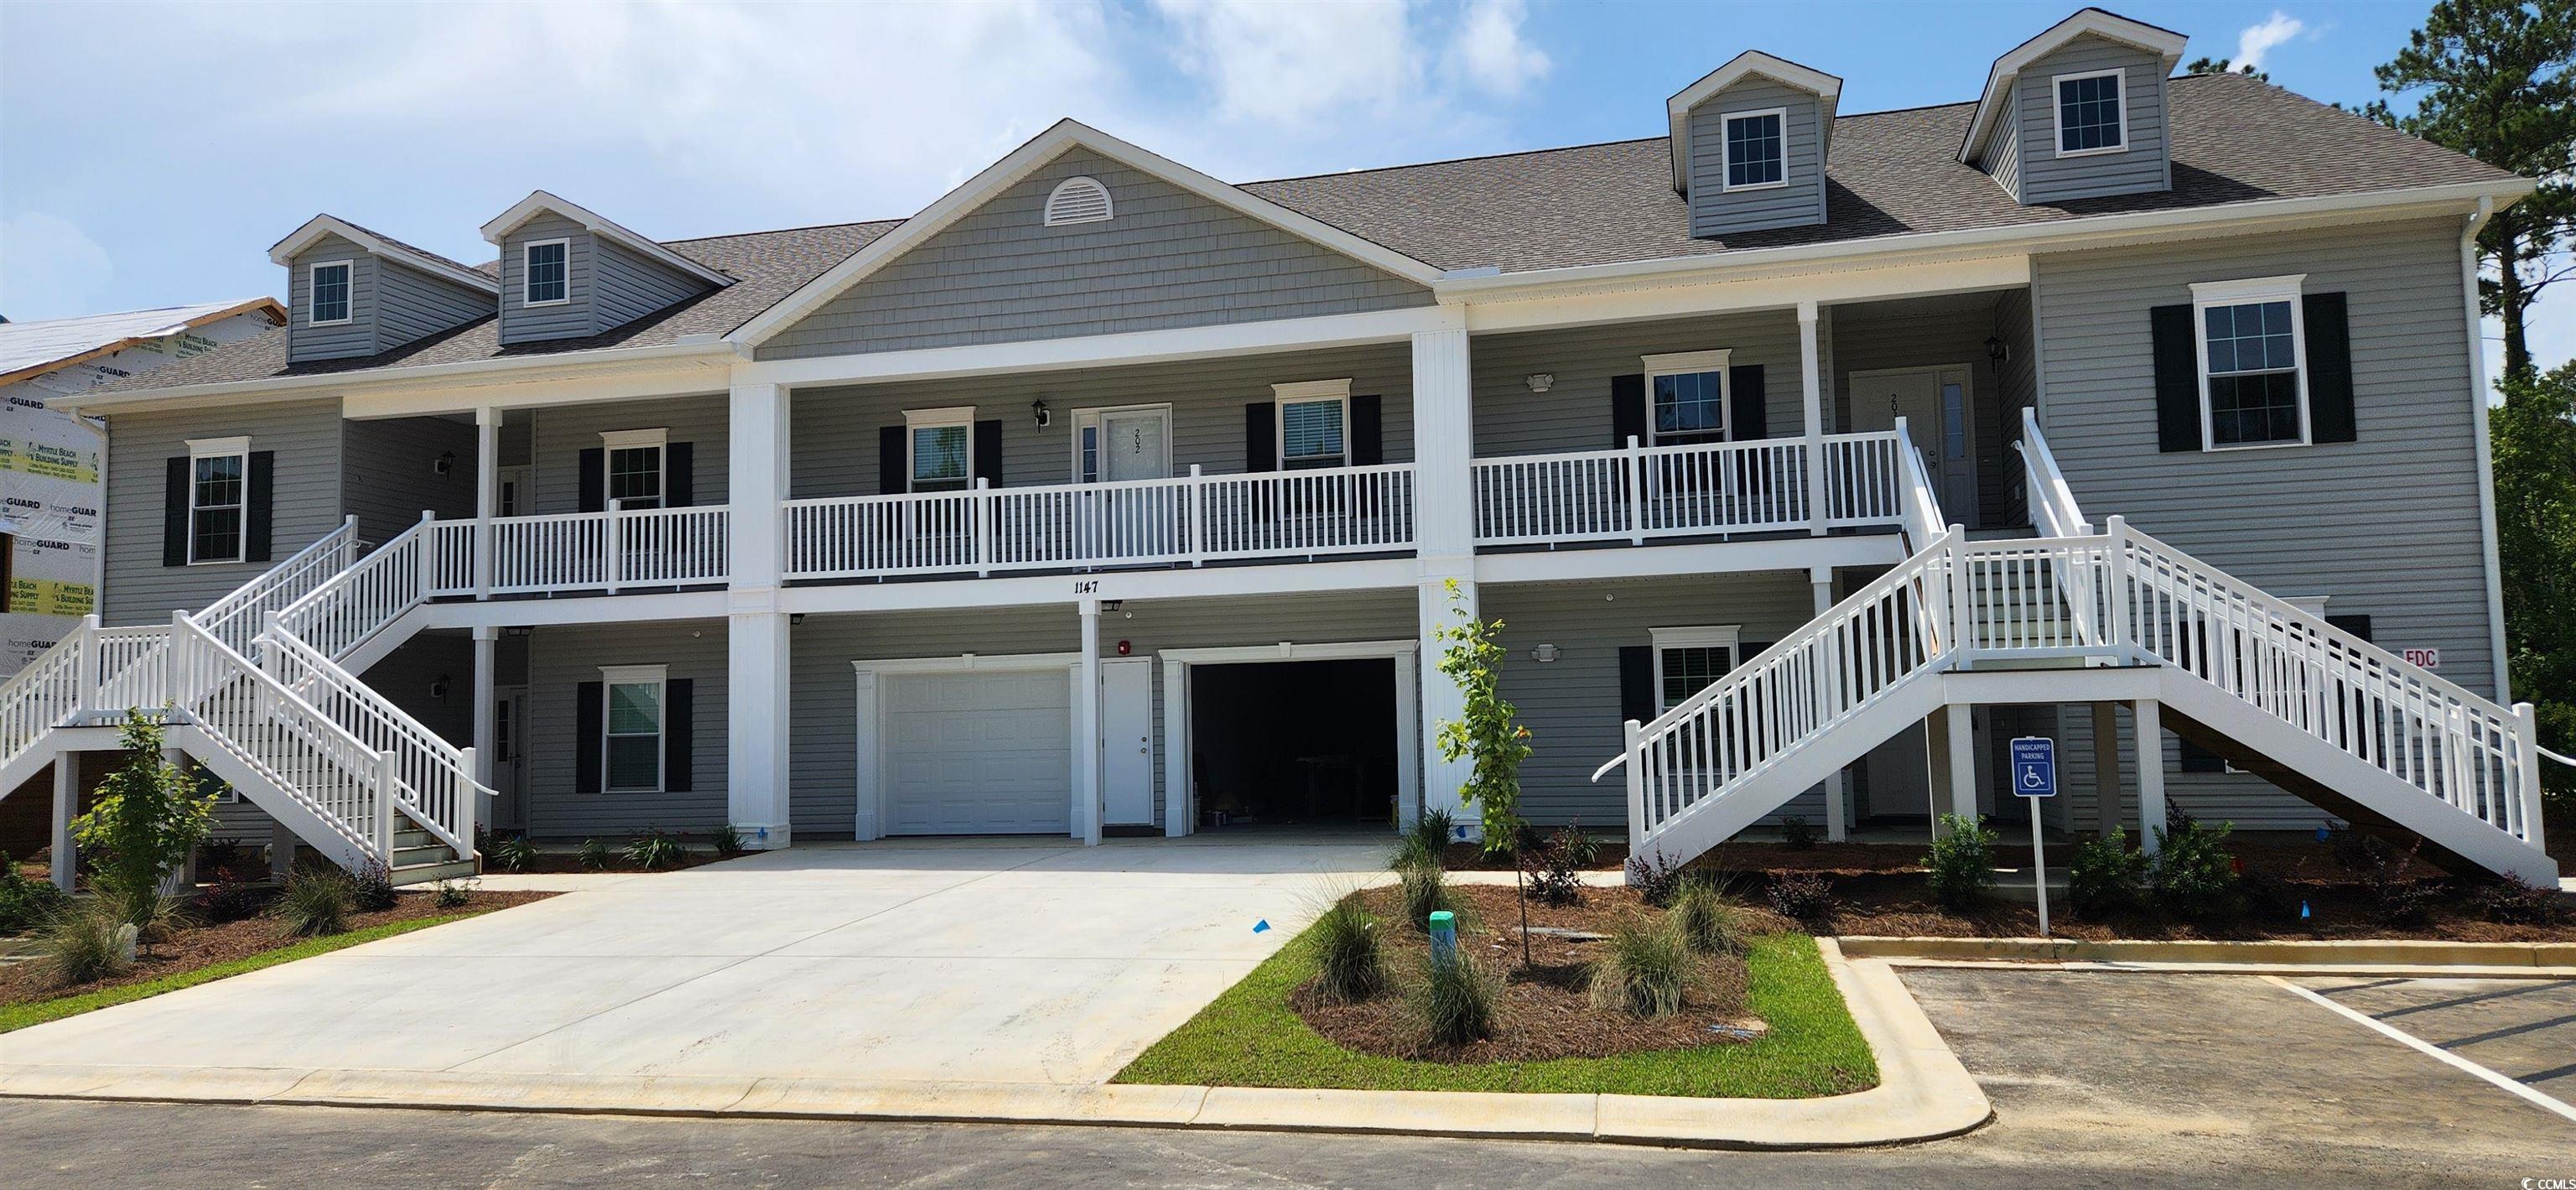 1147 Freeboard St. UNIT 202 middle Murrells Inlet, SC 29576